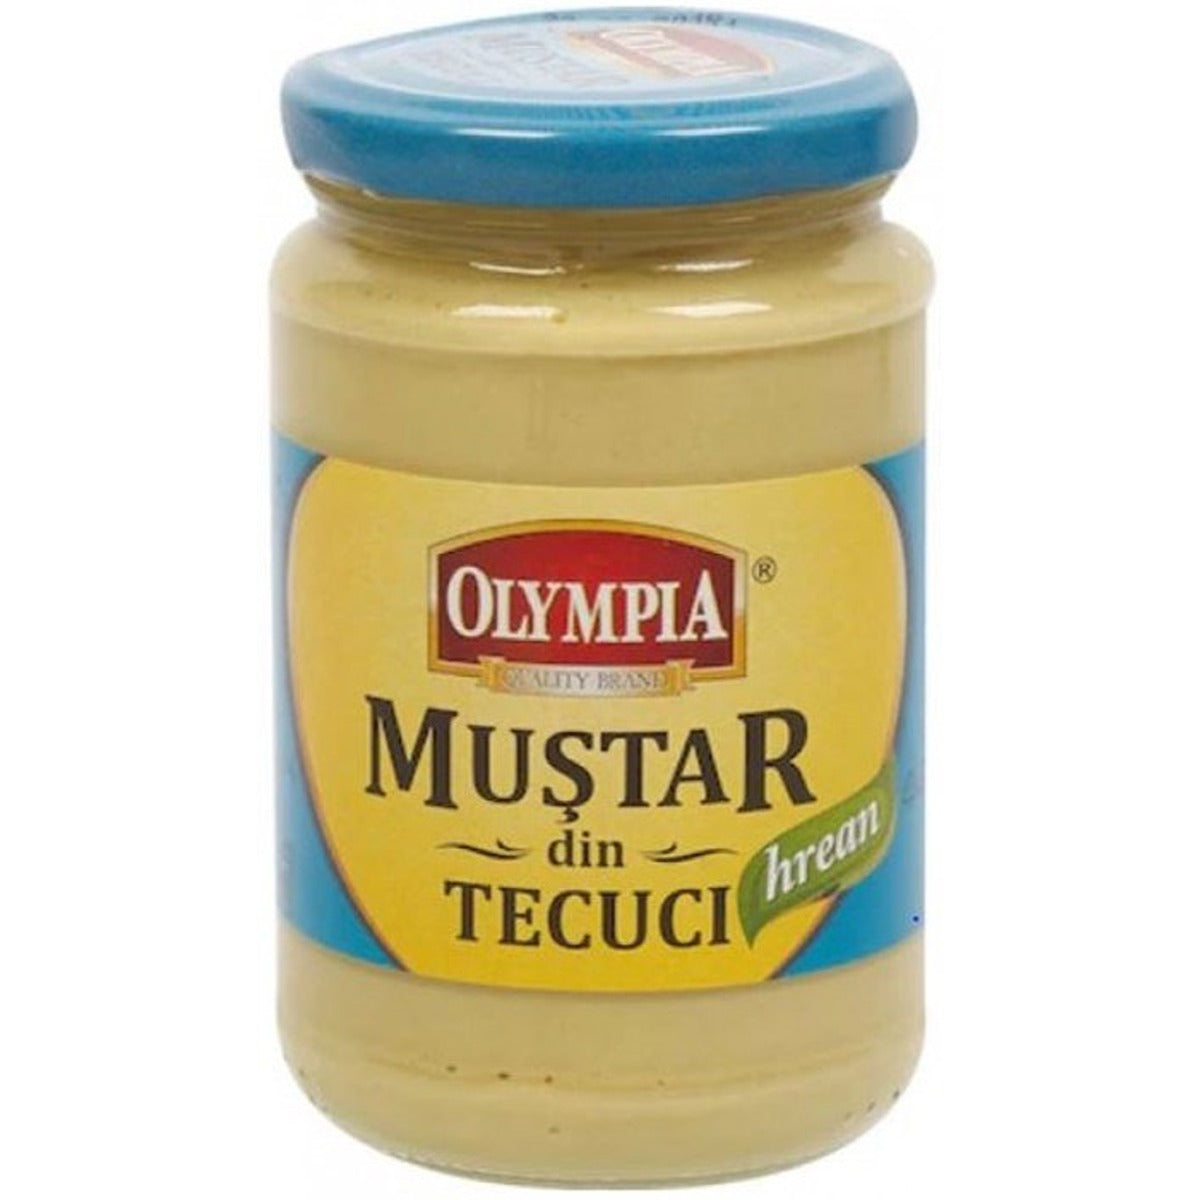 A jar of Olympia - Mustard with Horseradish - 314ml on a white background.